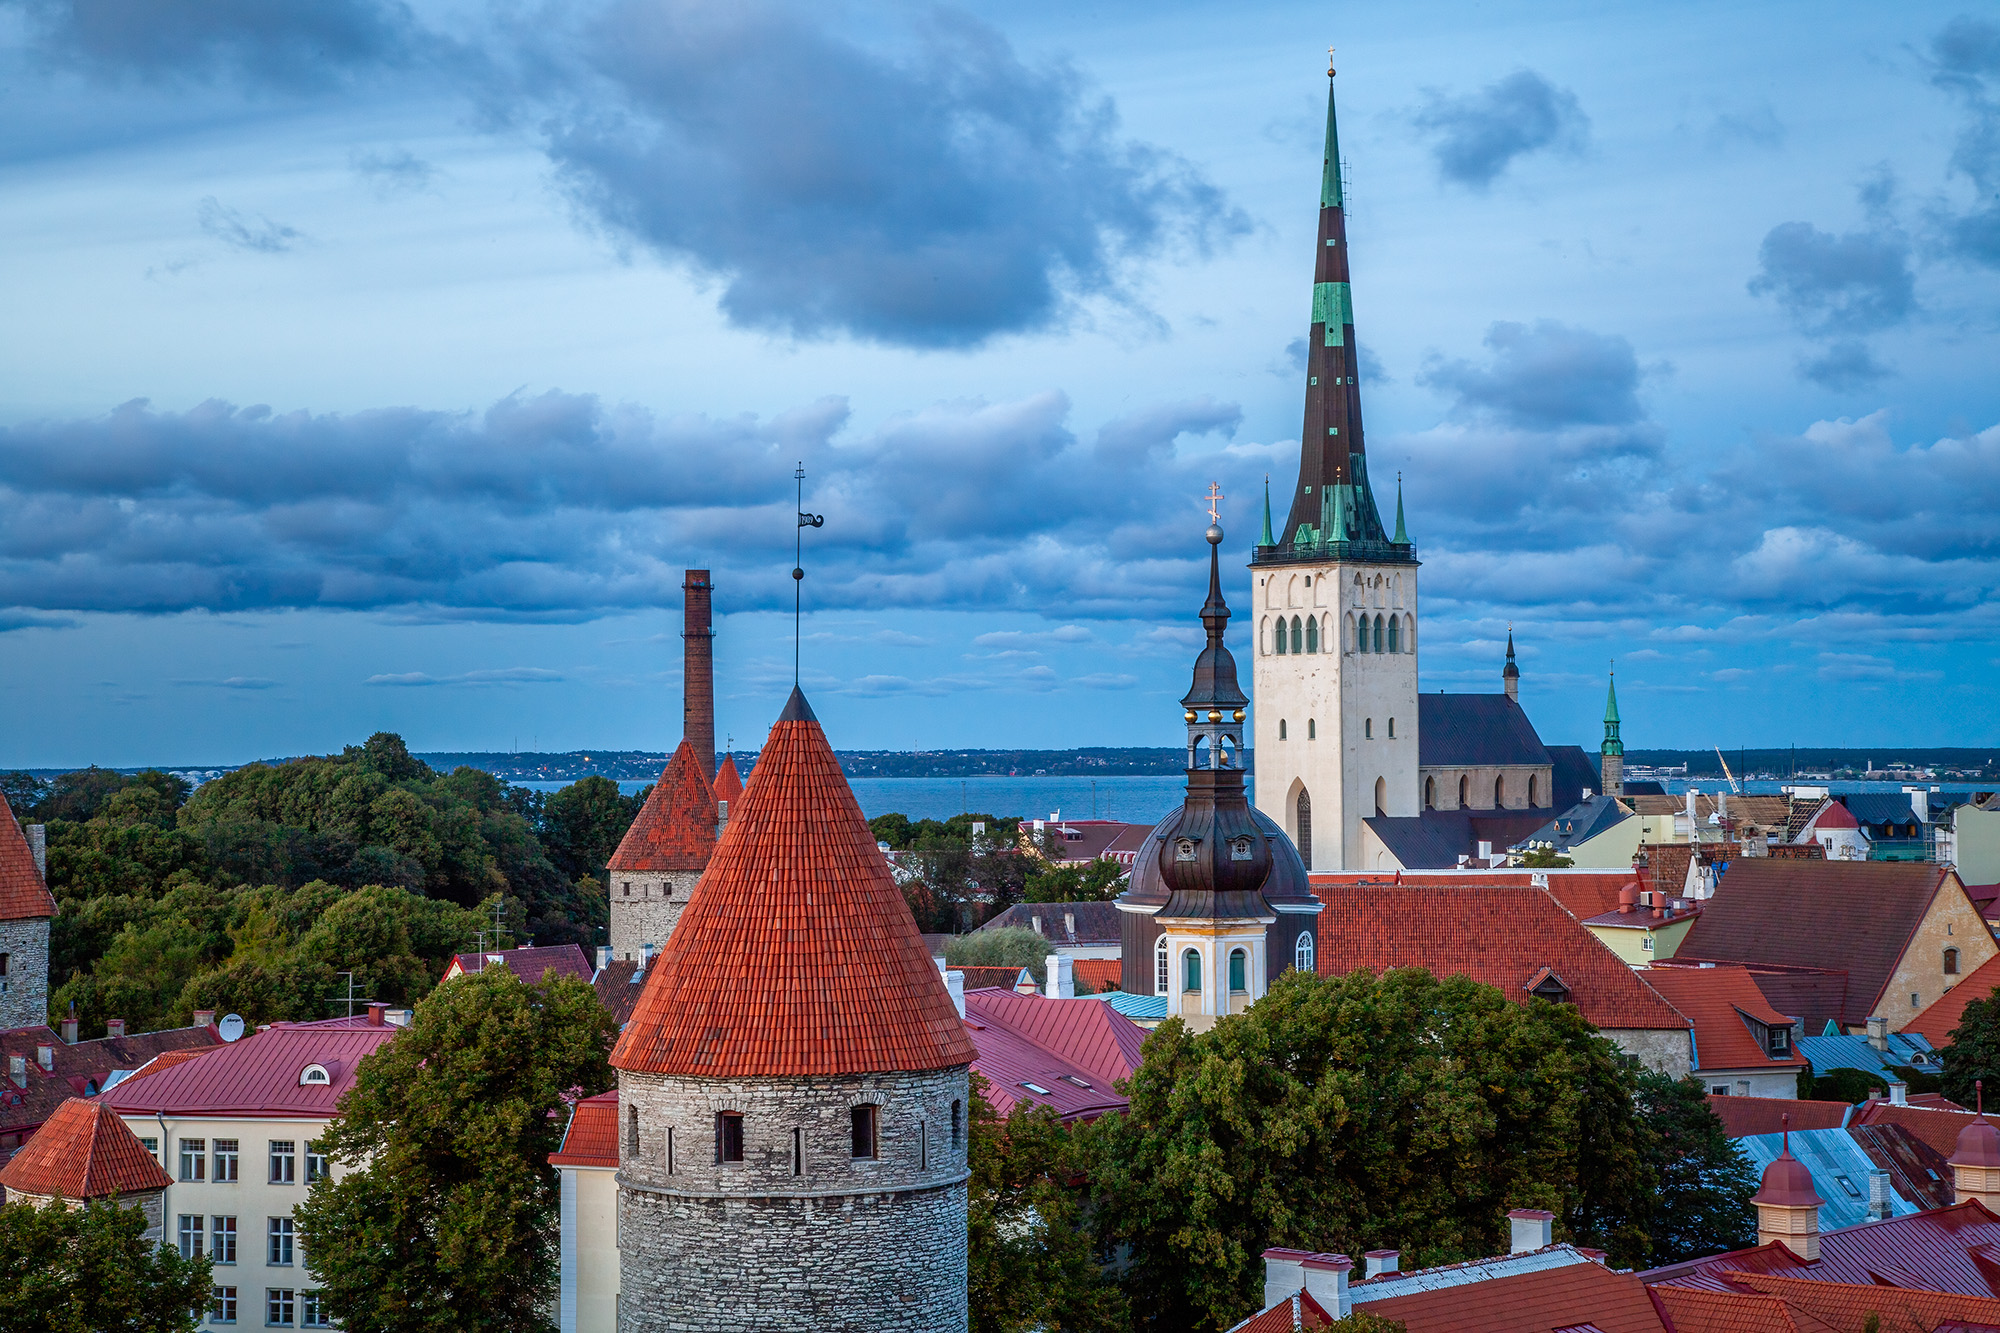 This evening shot captures the rooftops of Tallinn, Estonia's historic town. The cityscape is adorned with prominent landmarks...